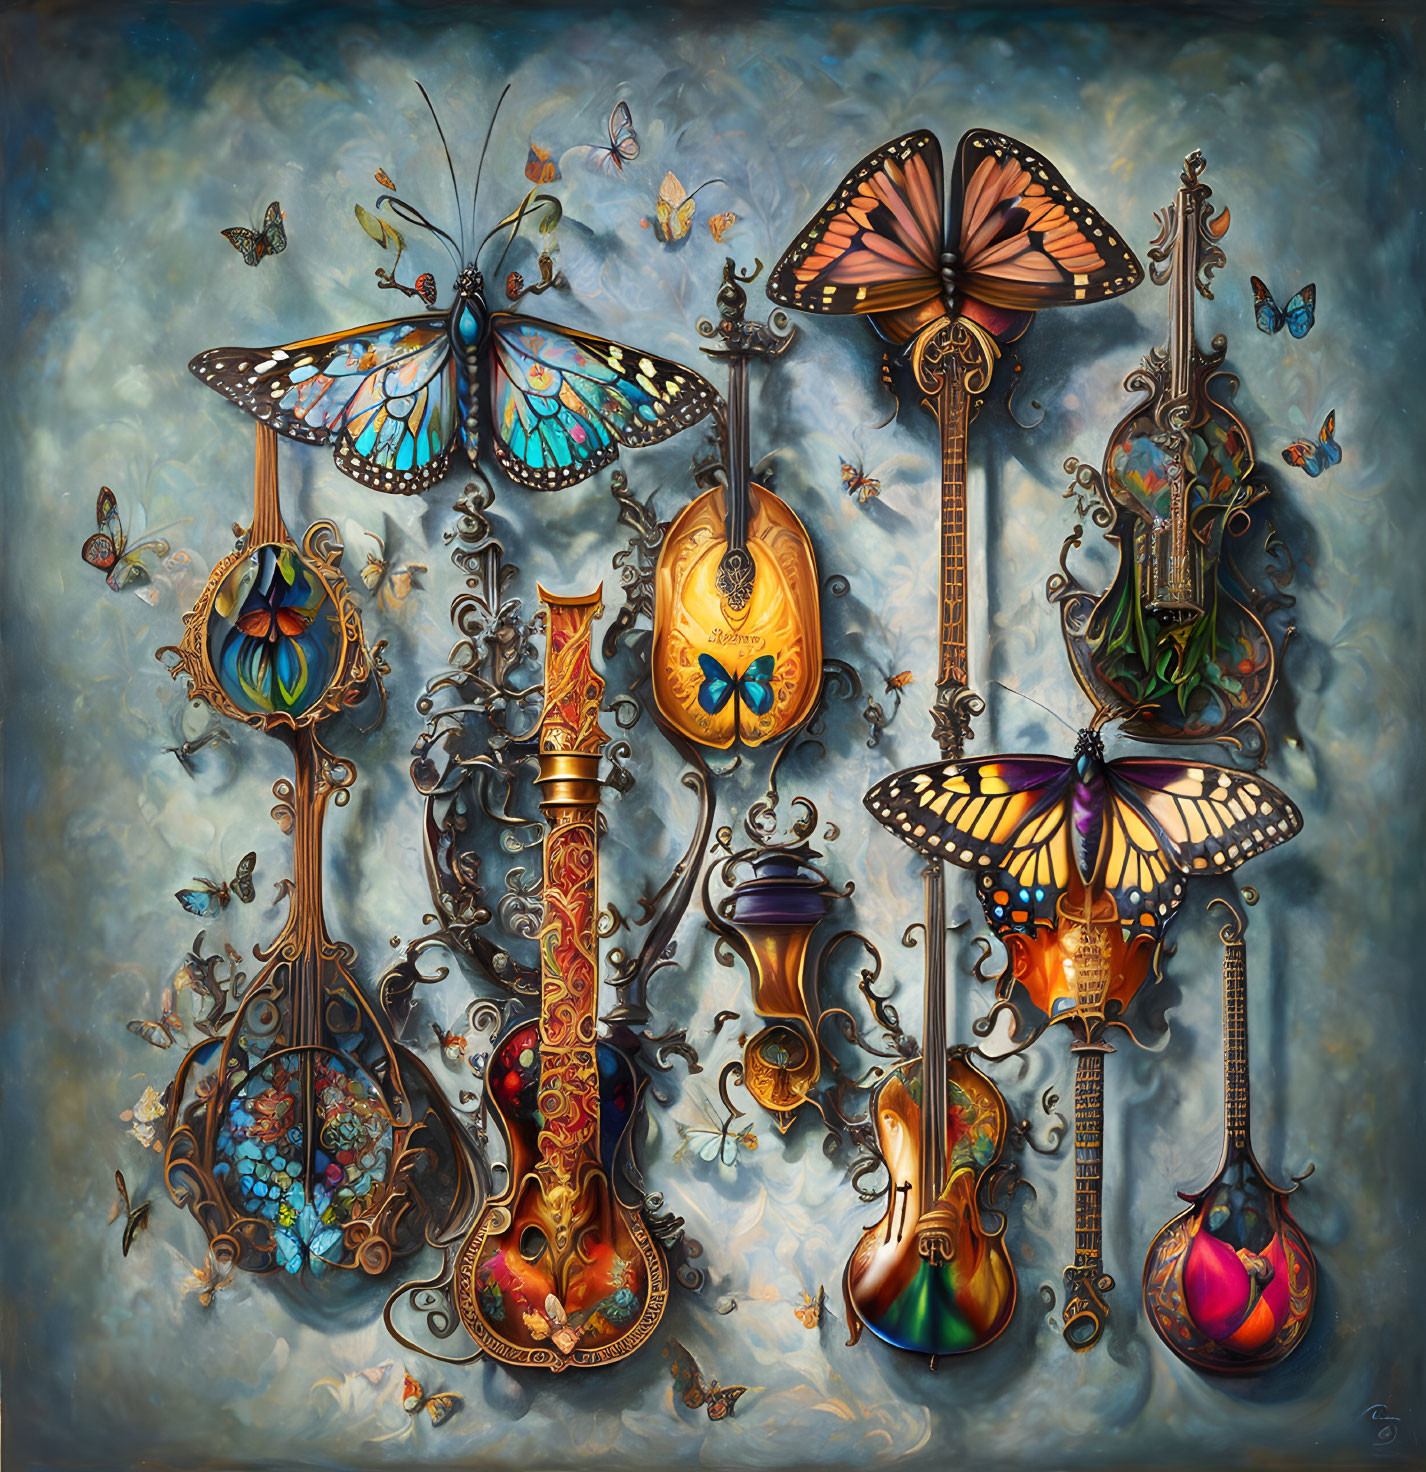 Ornate Stringed Instruments and Butterflies on Vibrant Blue Background